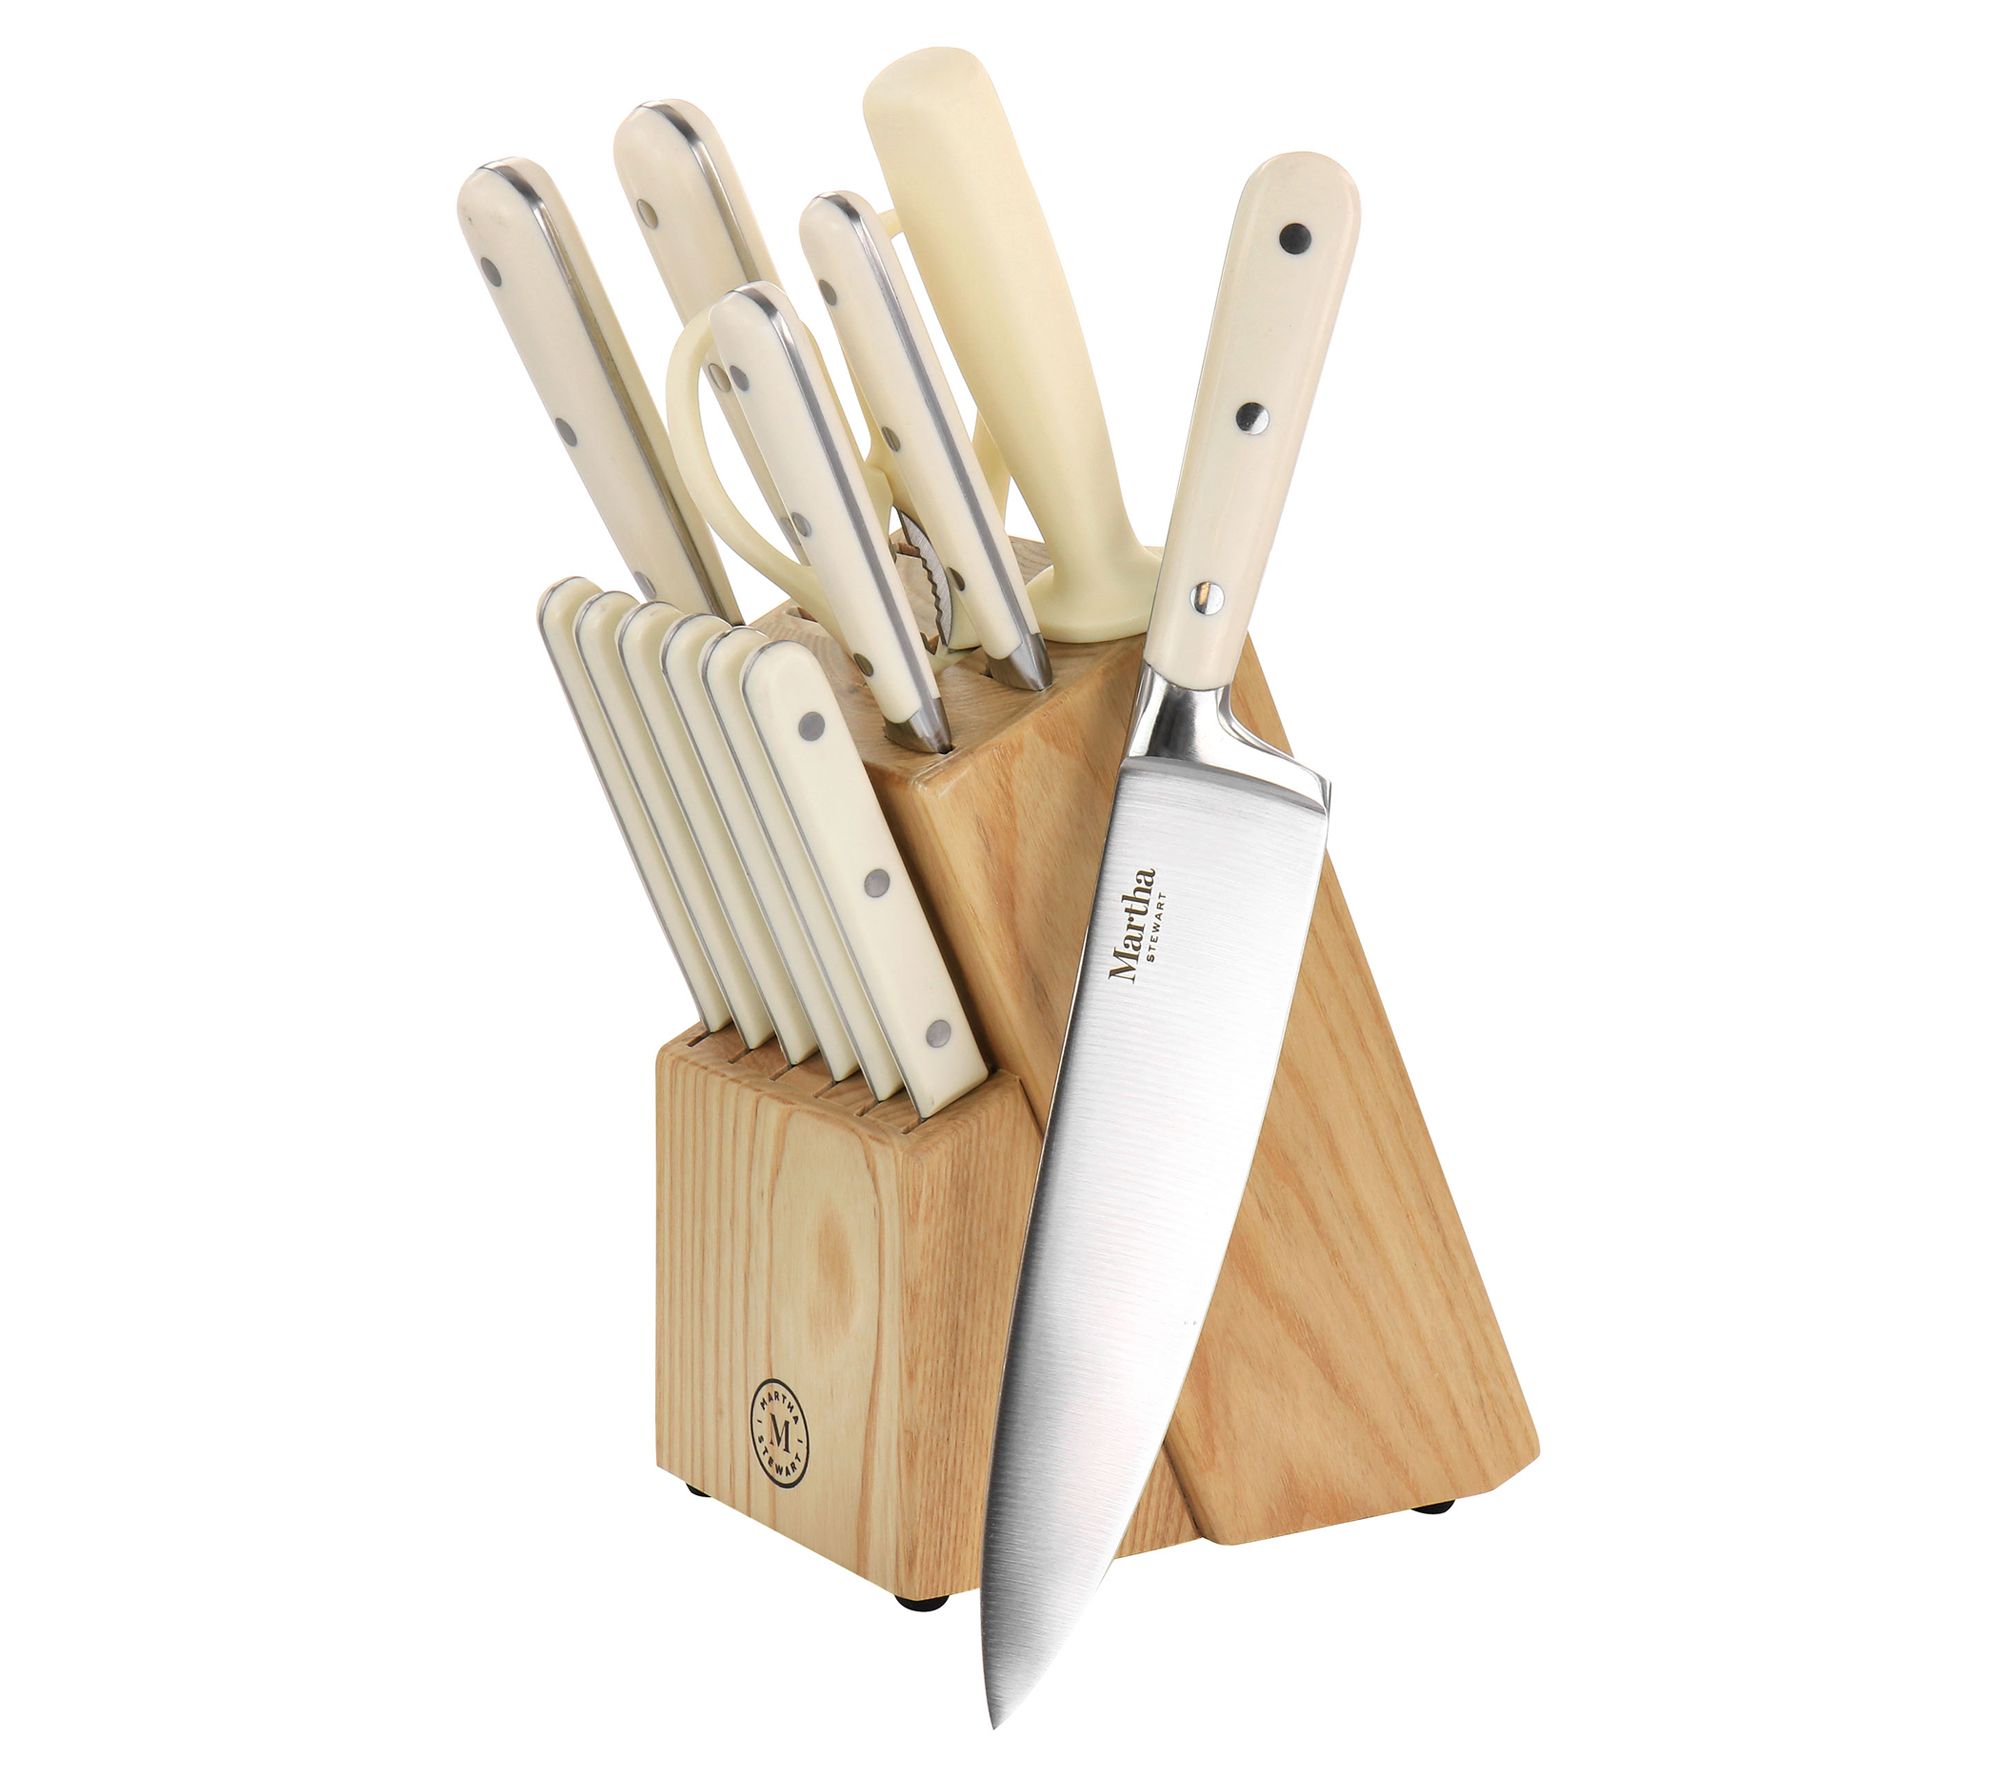 Martha Stewart Collection 14 Pc. Cutlery Set With Wood Block, Cutlery, Household